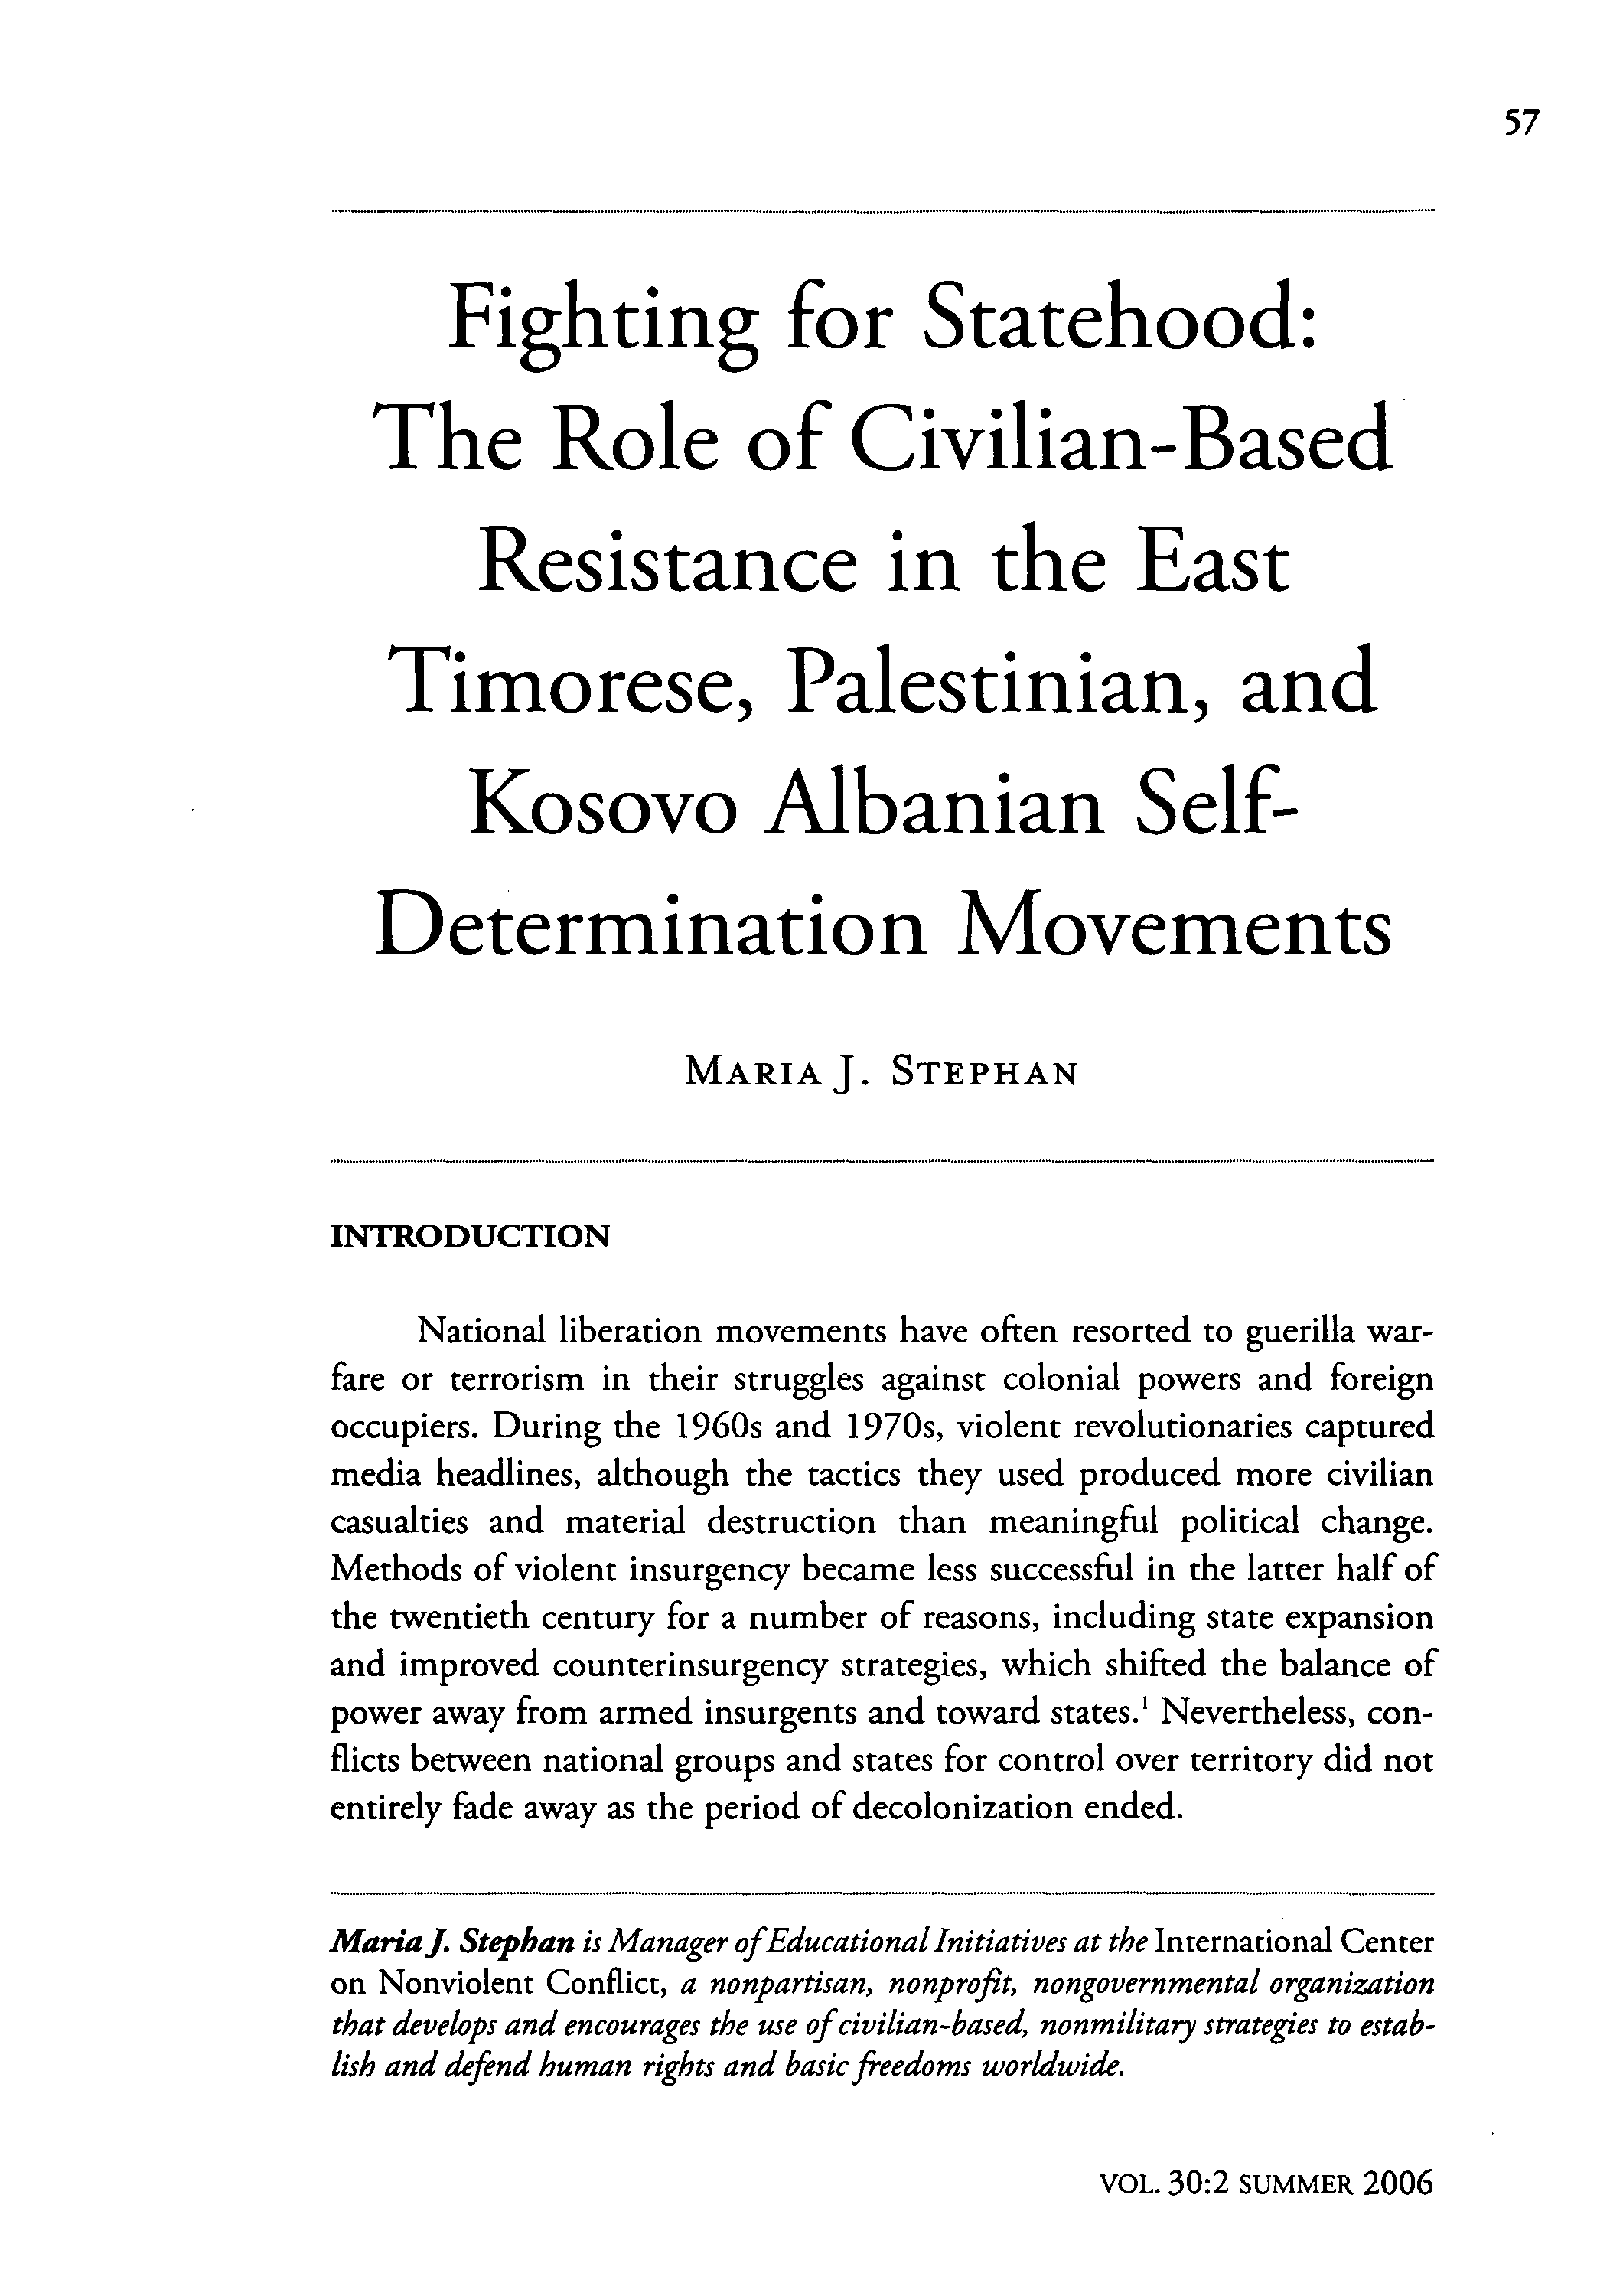 Fighting for Statehood: The Role of Civilian-Based Resistance in the East Timorese, Palestinian, and Kosovo Albanian Self-Determination Movements